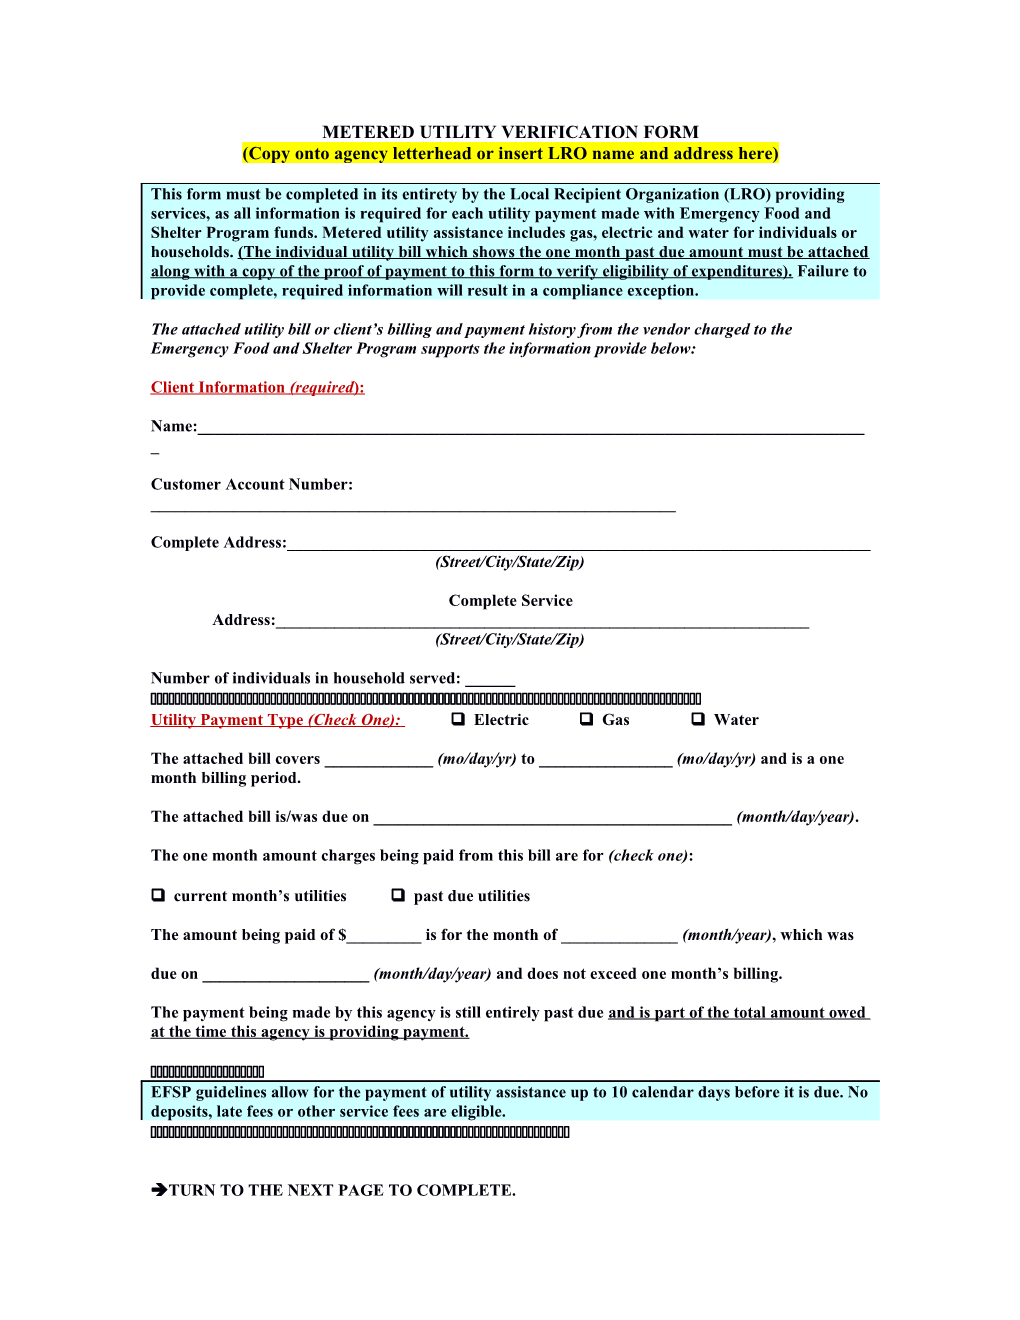 Metered Utility Verification Form